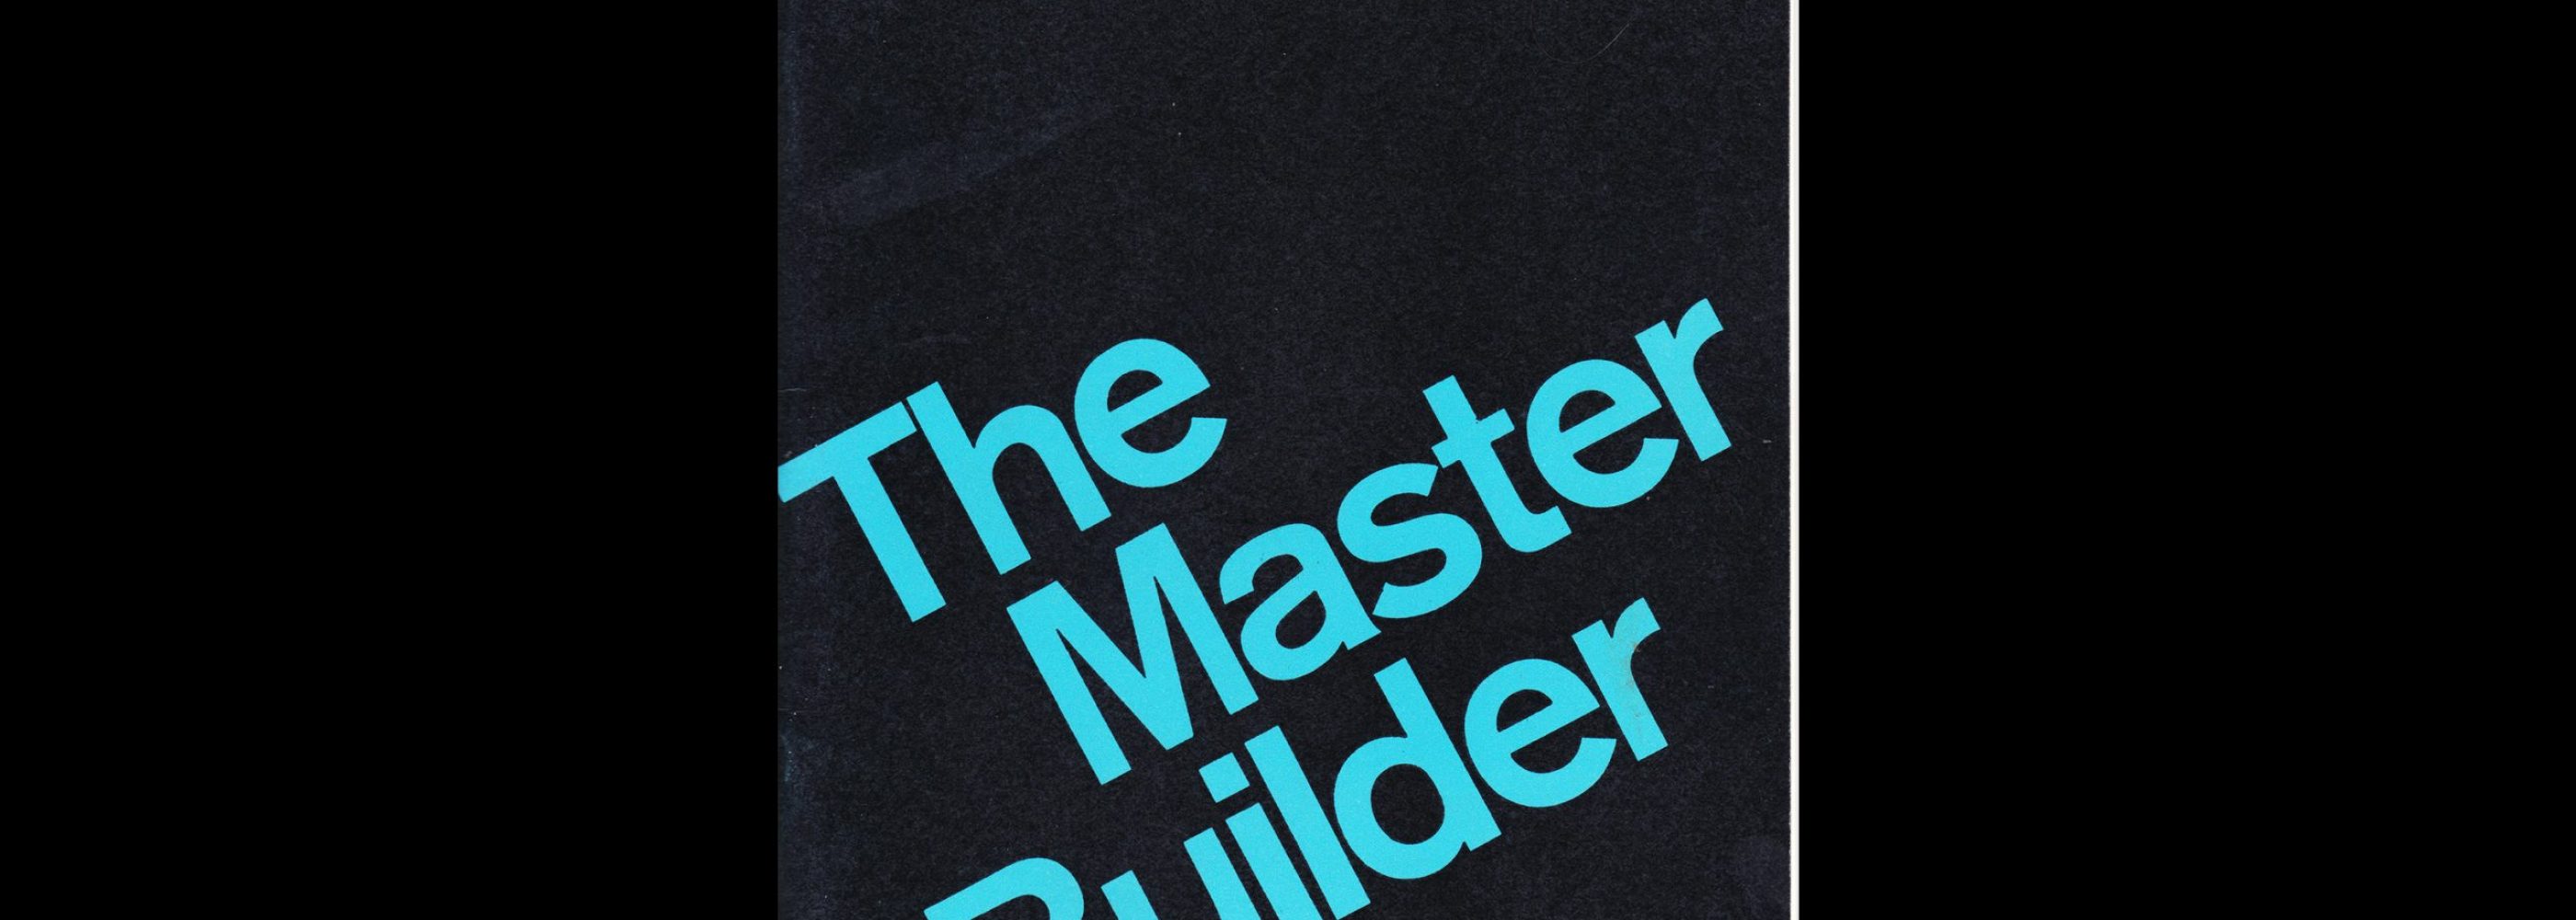 The Master Builder, The National Theatre, London, 1964. Design by Ken Briggs